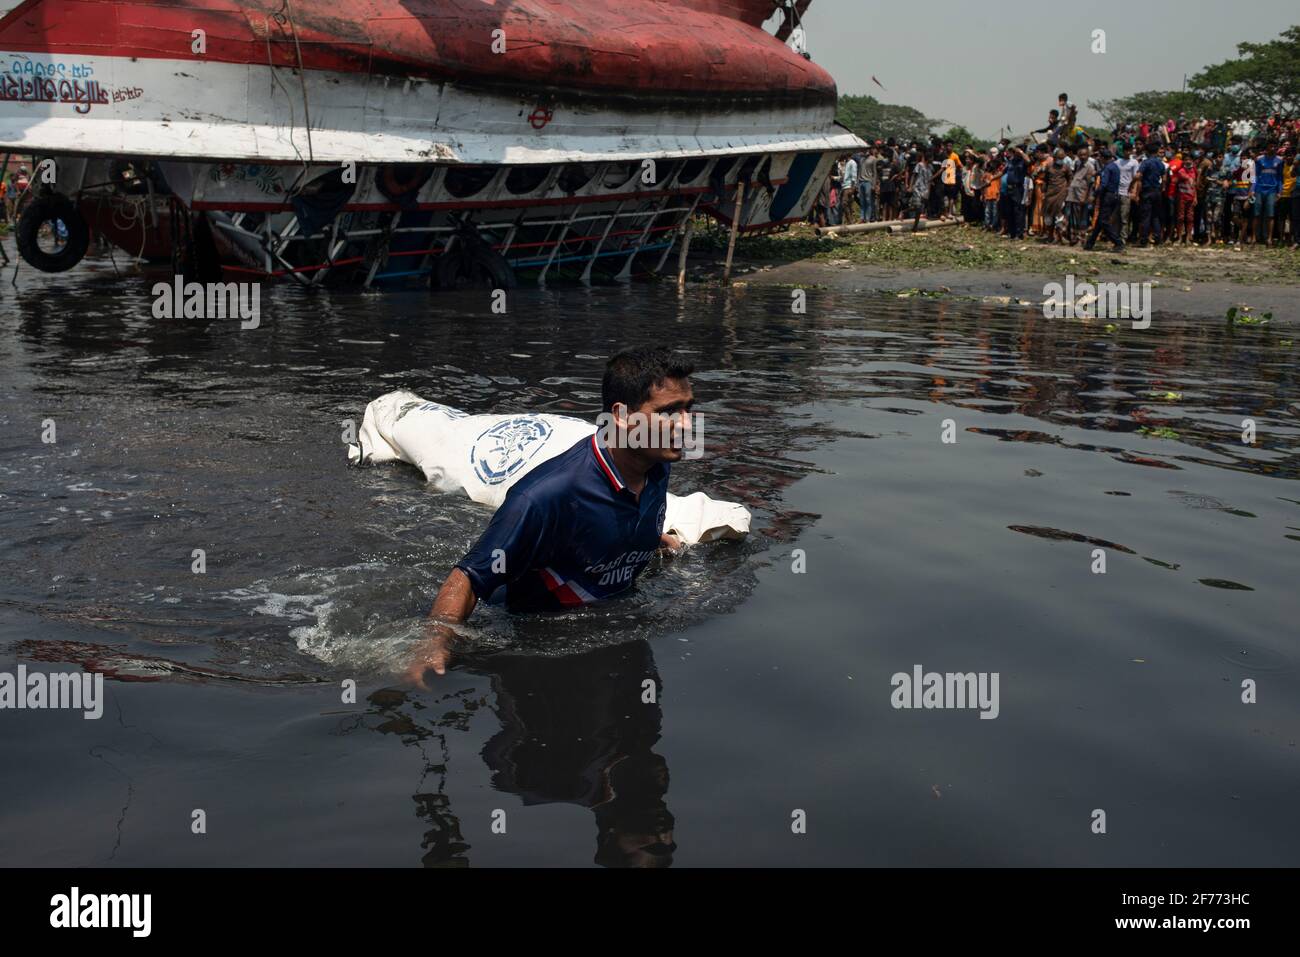 (EDITORS NOTE: Image depicts death)A member of the rescue team seen pulling a dead body in bag just after pulling out the capsized boat from the Shitalakshya River. A Bangladeshi ferry capsized after colliding with a cargo vessel on Sunday in Shitalakkhya river south of the capital Dhaka, leaving at least 26 people dead and a few still missing. Stock Photo